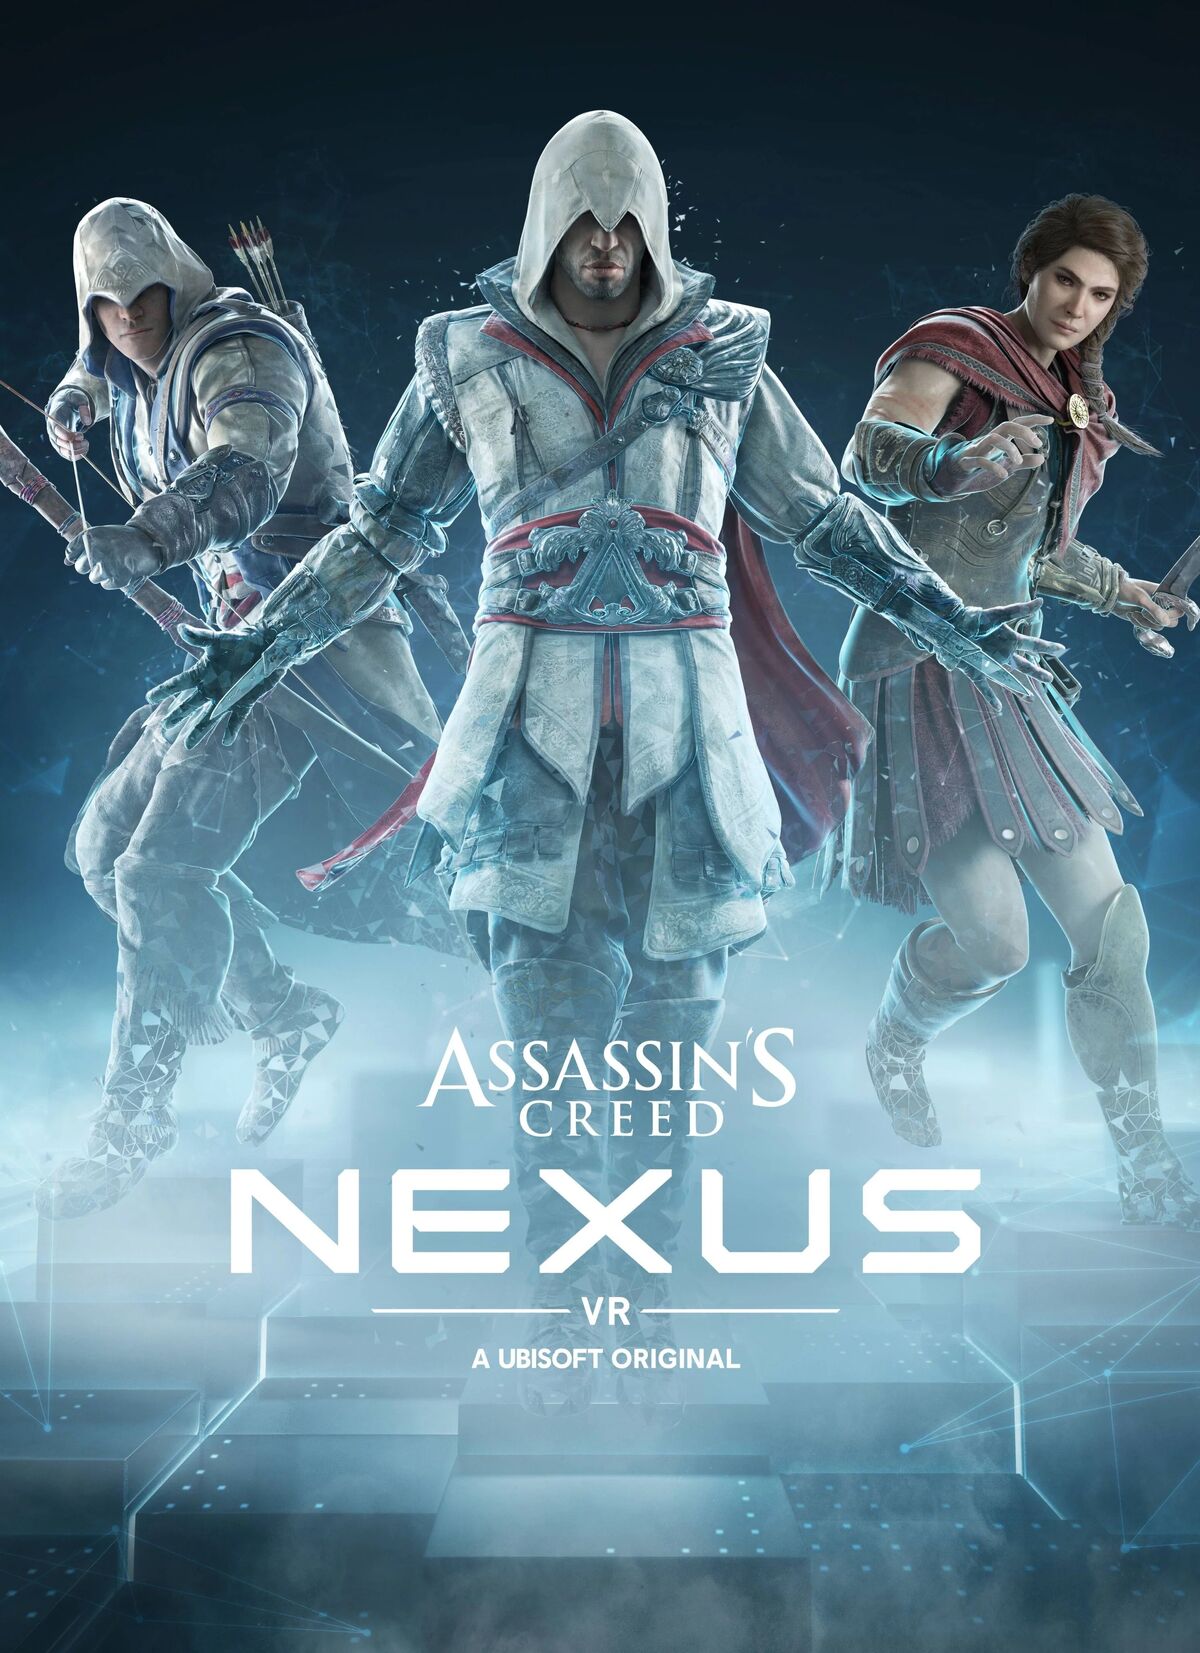 Assassin's Creed Nexus VR, Review